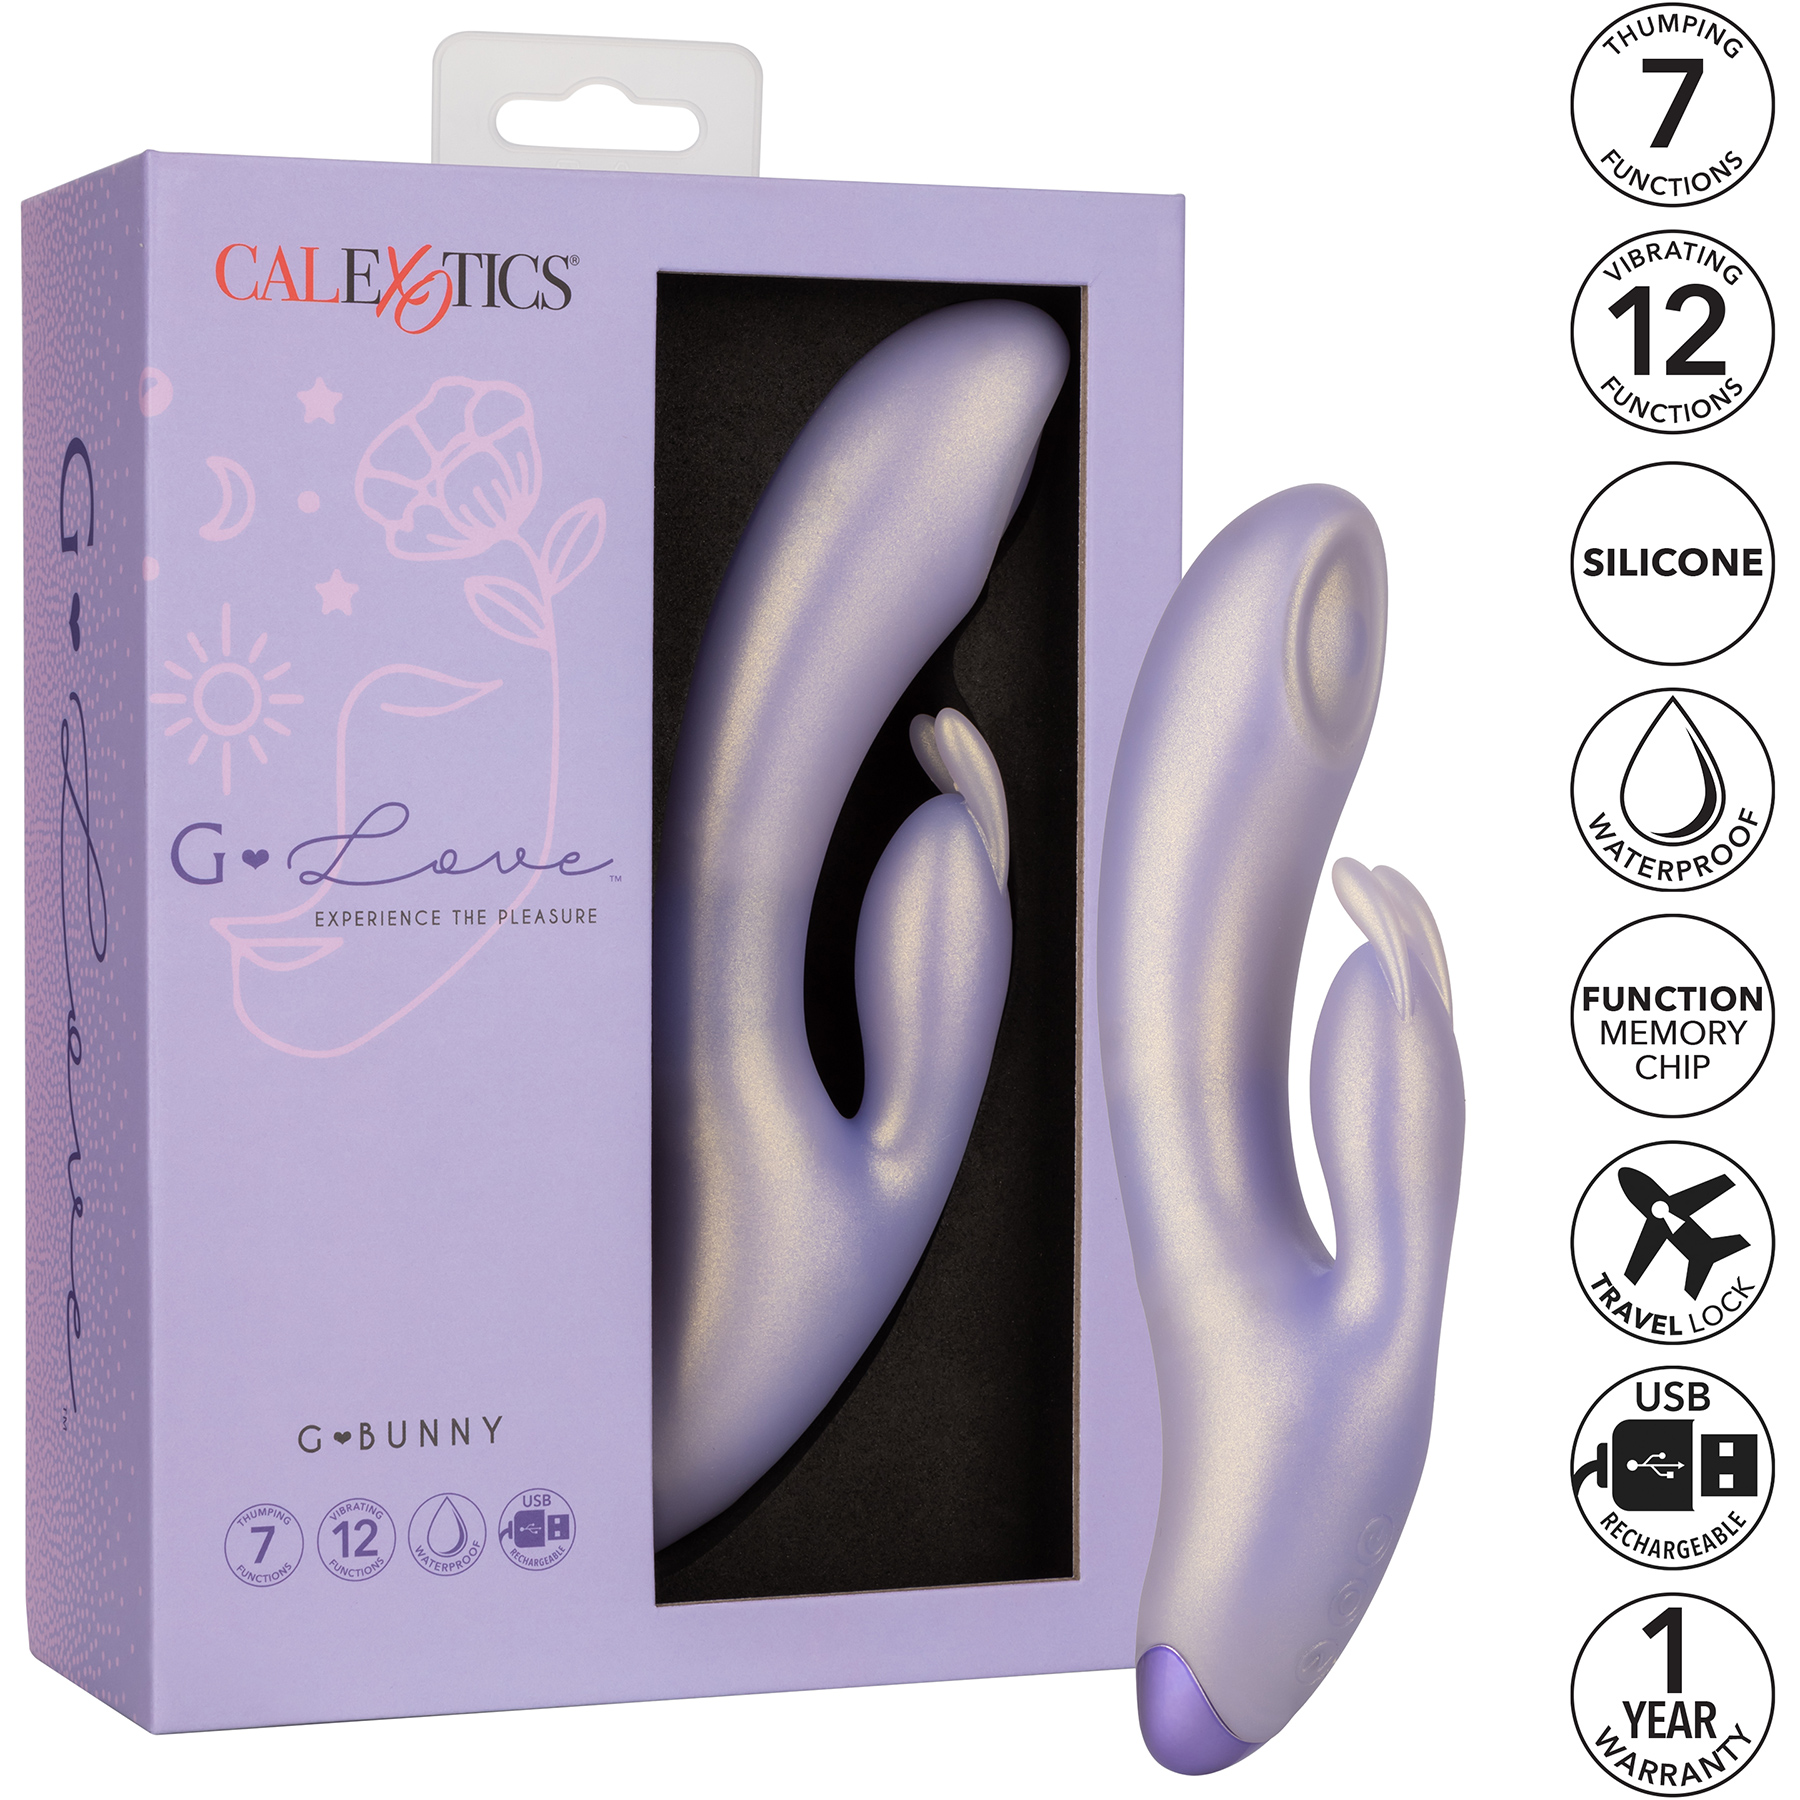 G-Love G-Bunny Silicone Rechargeable Waterproof Dual Stimulation Vibrator By CalExotics - Features